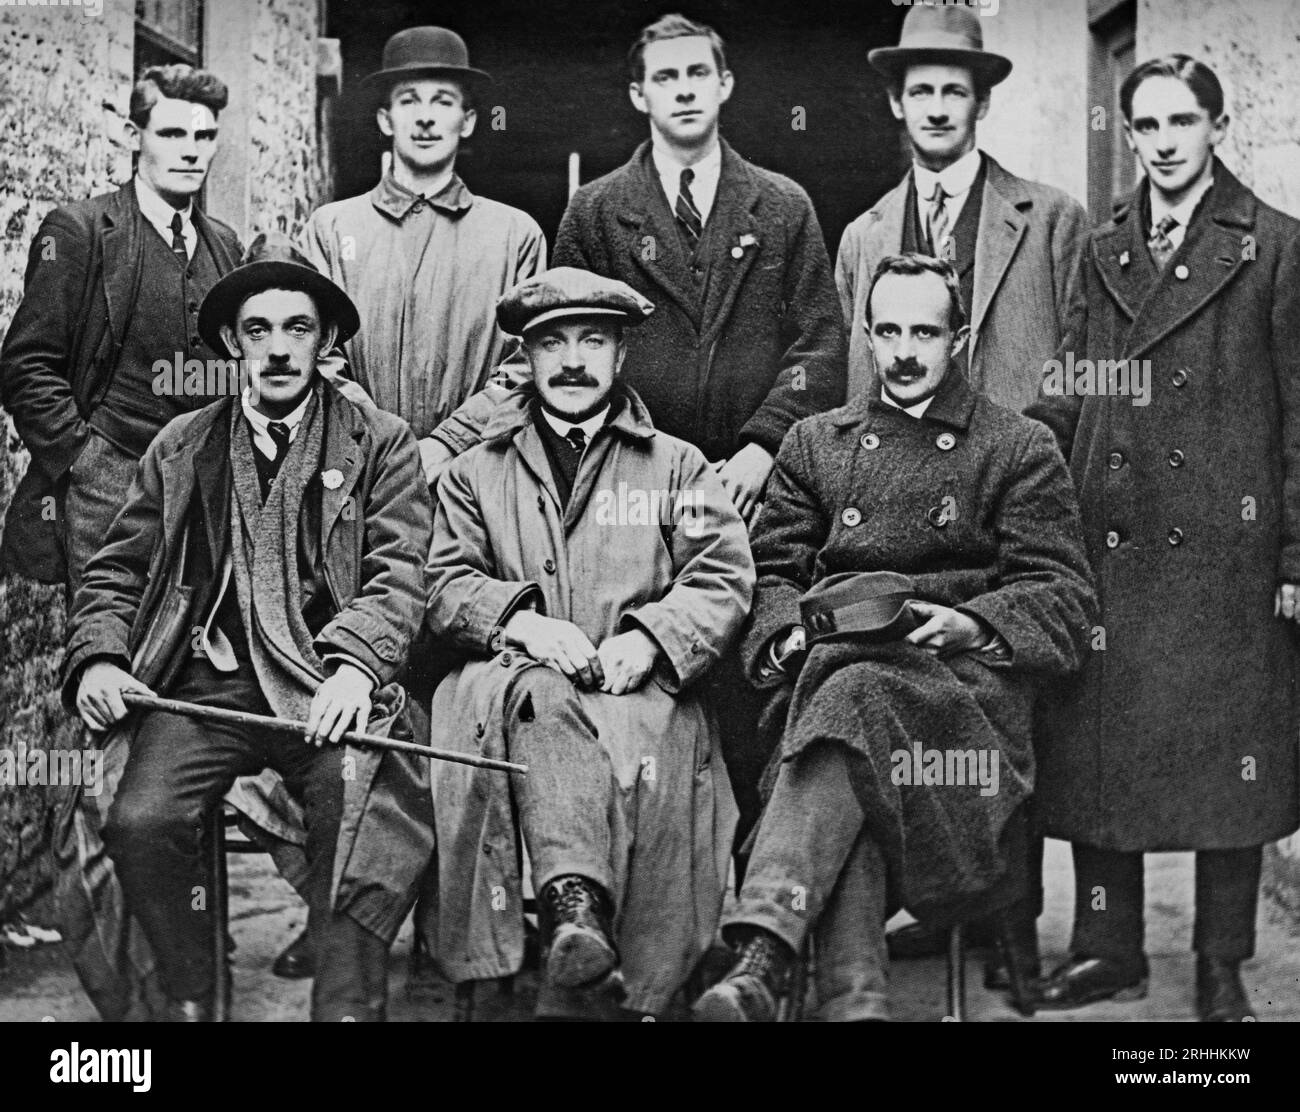 An early 20th century photograph of Cork Sinn Féin delegates who negotiated in Dublin in 1919. They included Tomás Mac Curtain, later shot in his home by the RIC (Royal Irish Constabulary) and Terence McSwiney who died while on hunger strike in Brixton Prison, England. Stock Photo